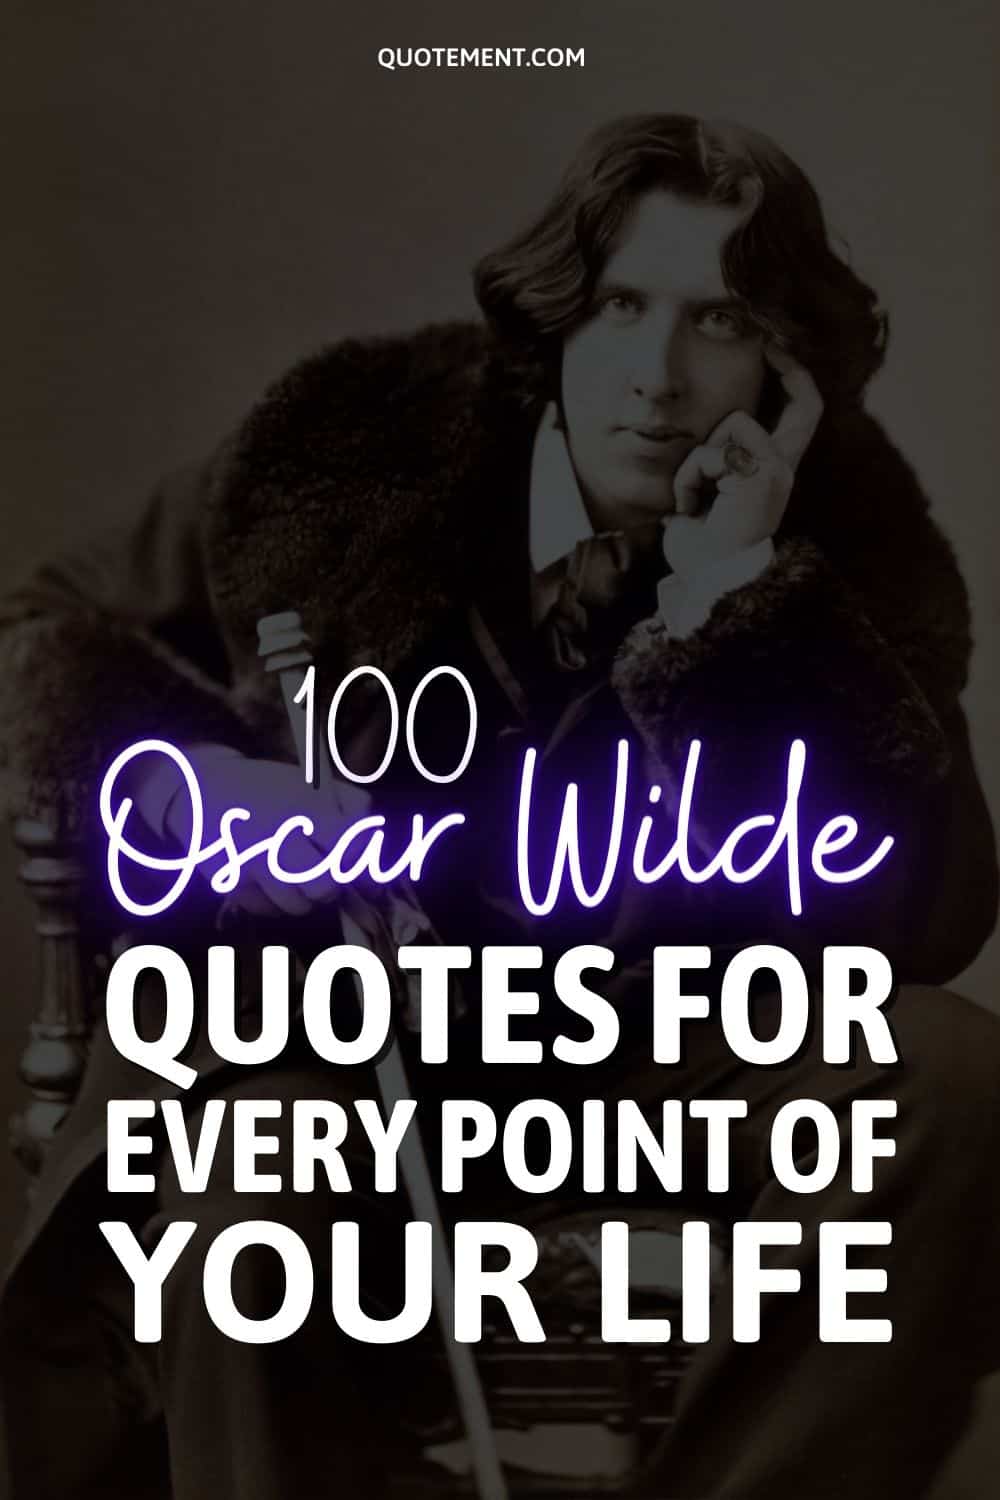 100 Oscar Wilde Quotes For Every Point Of Your Life
